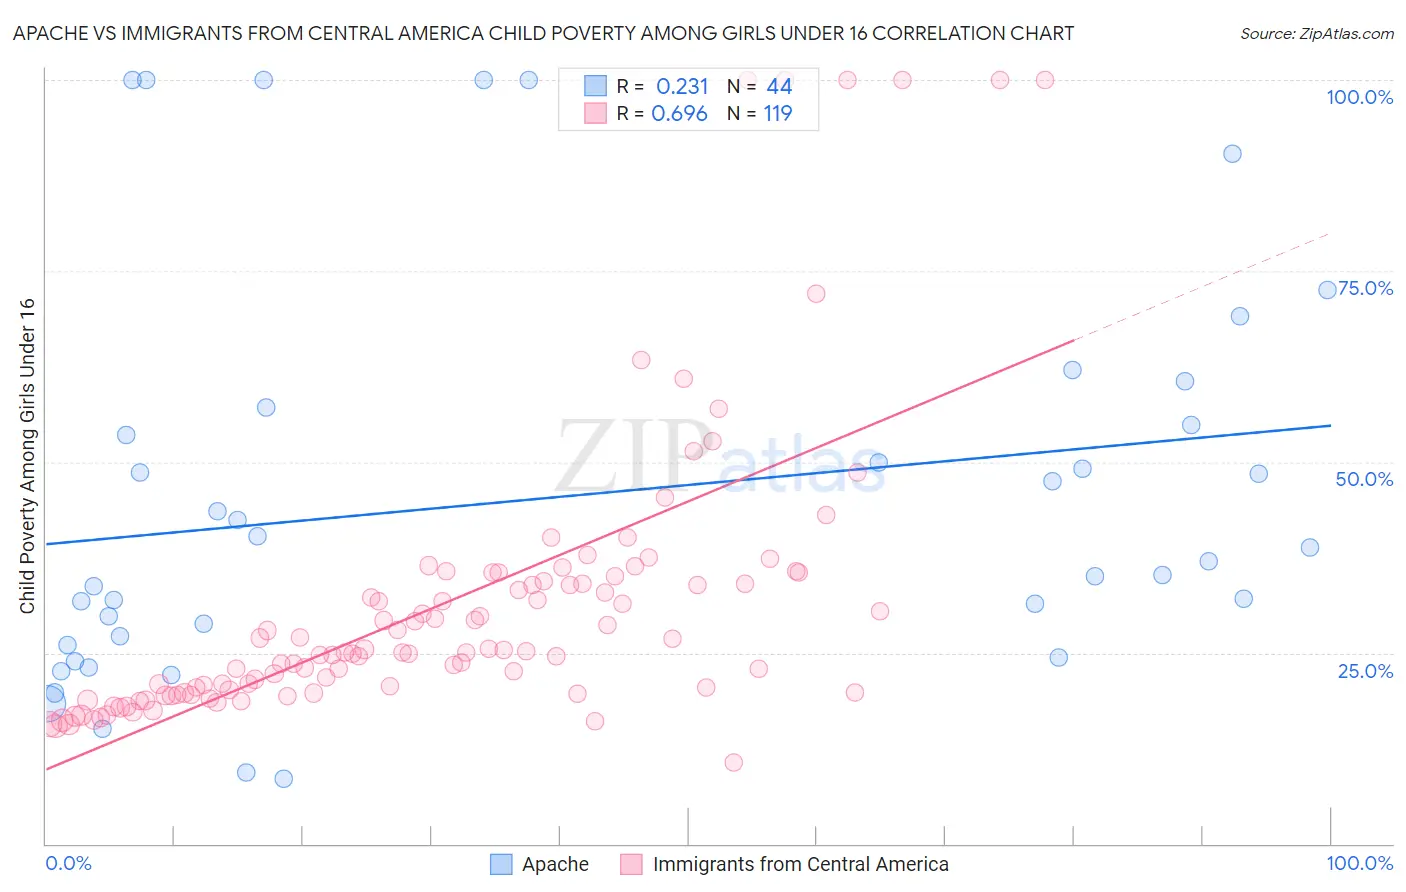 Apache vs Immigrants from Central America Child Poverty Among Girls Under 16